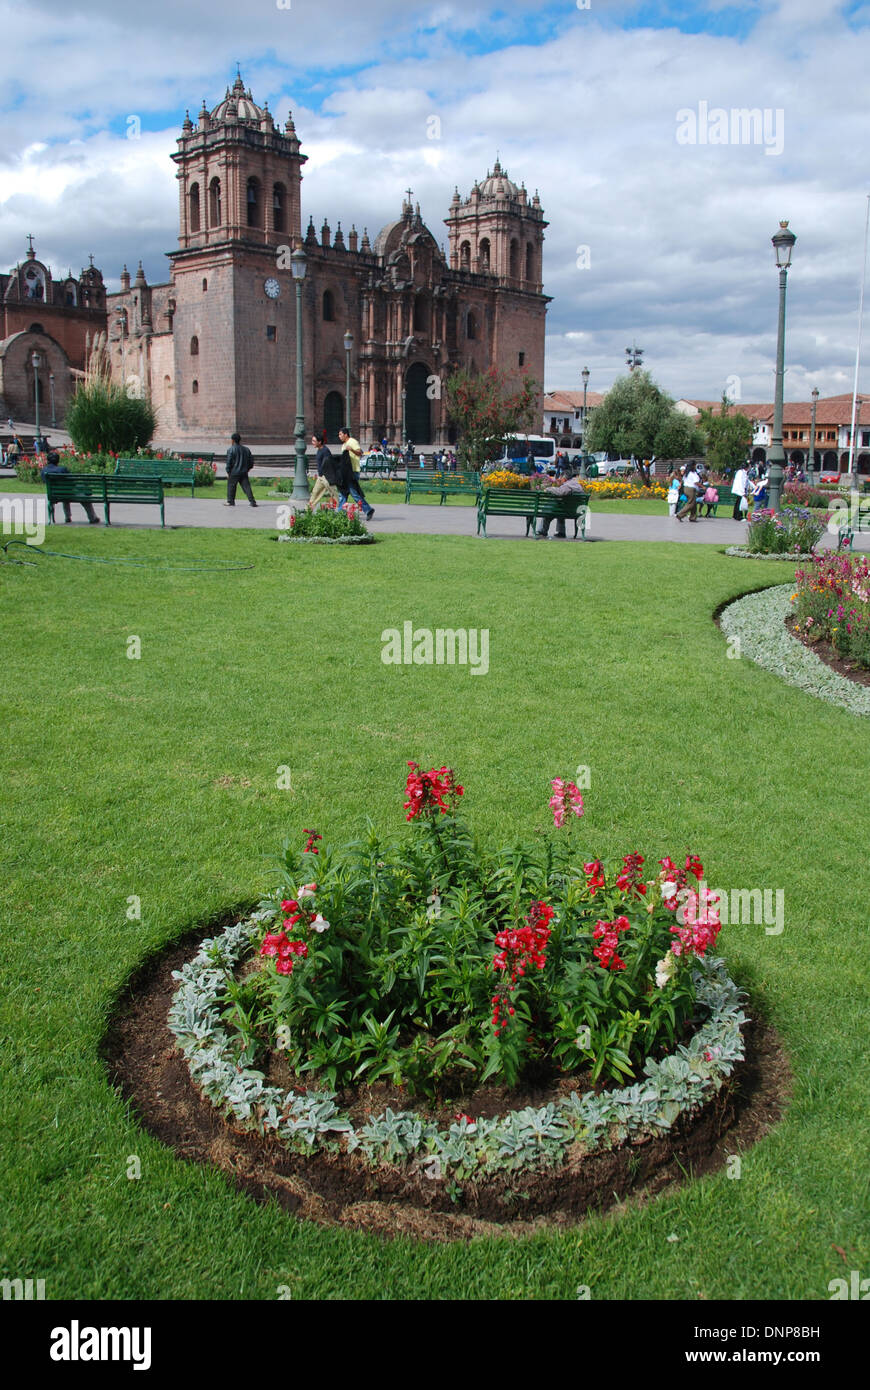 View of Cuzco Cathedral in Peru, with park flowers in the foregound Stock Photo